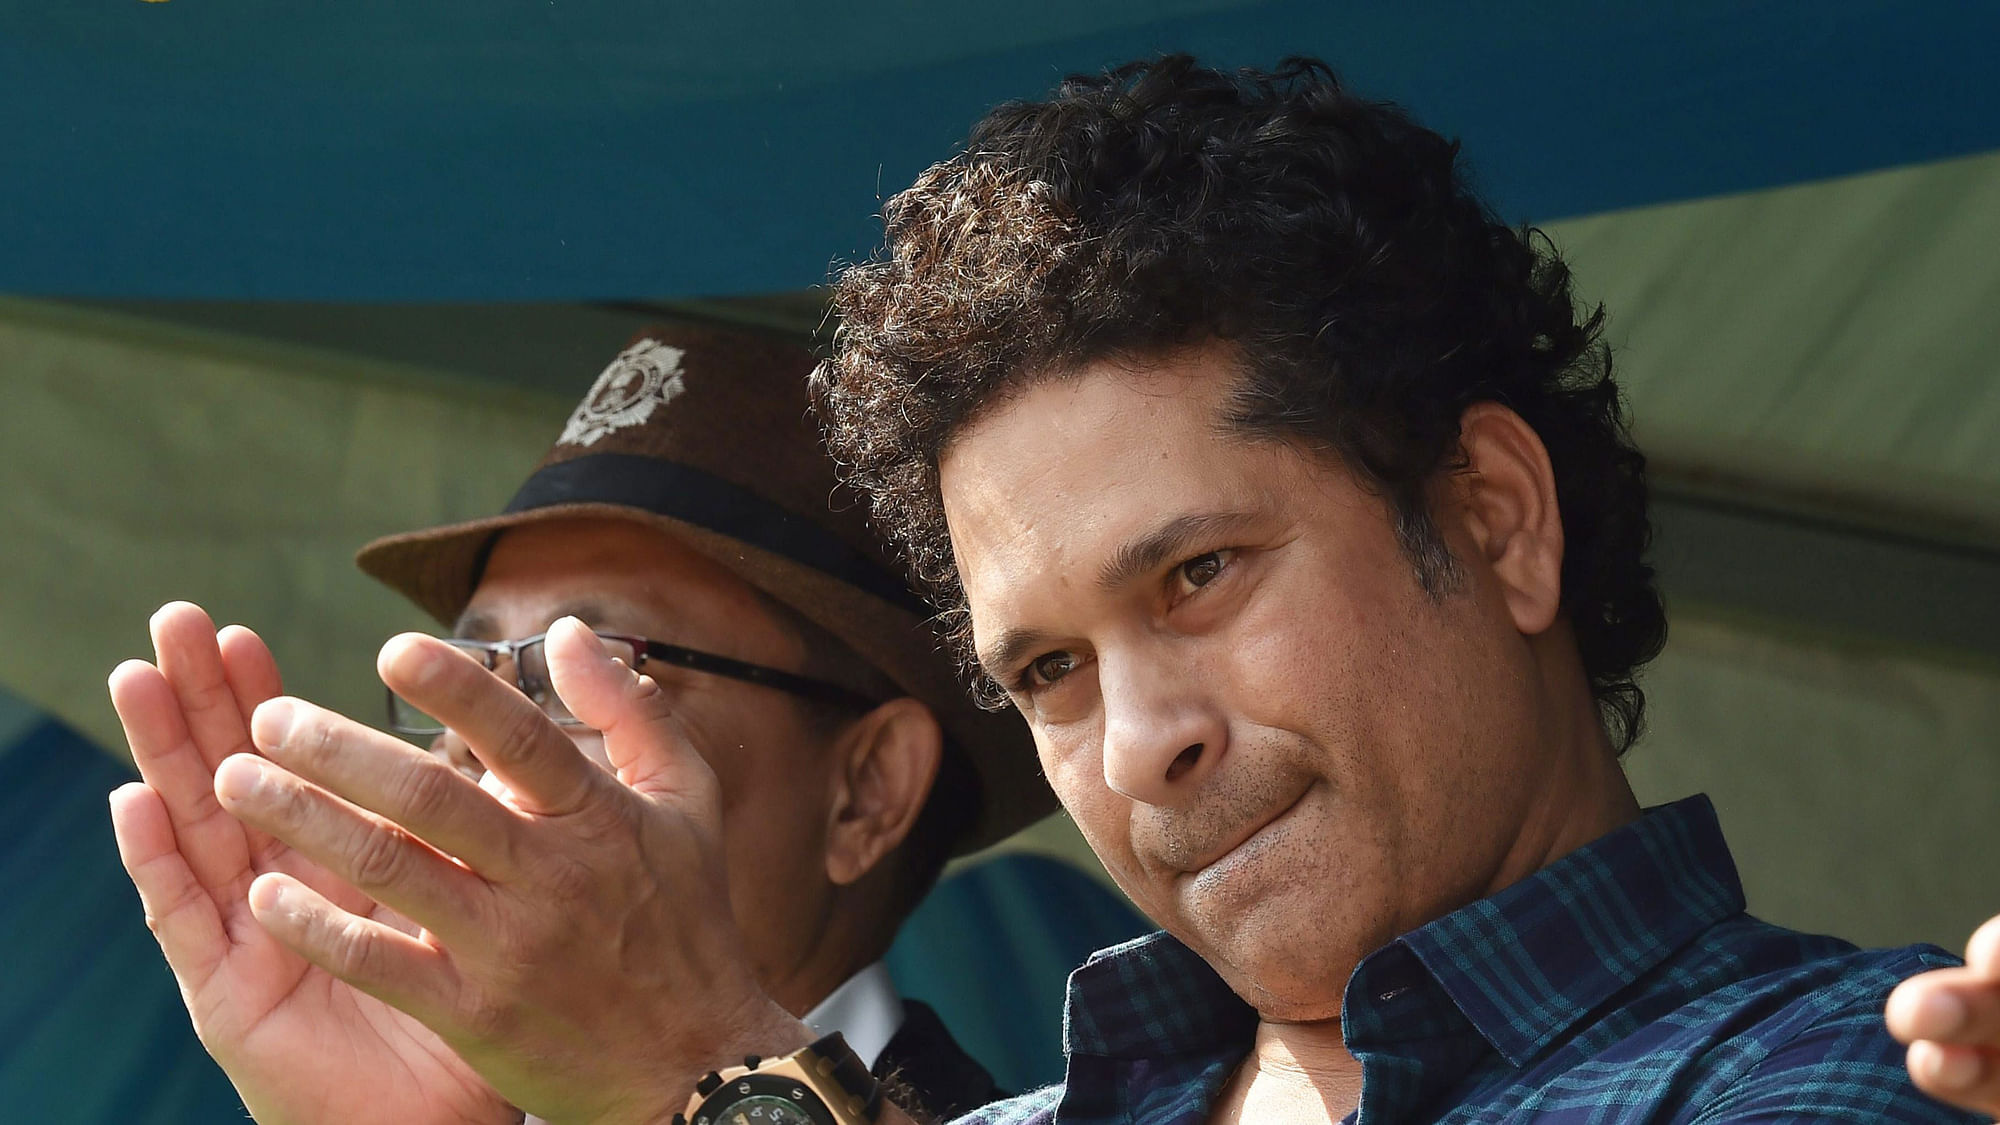 BCCI Ethics Officer said that Tendulkar, through his legal Counsel Amit Sibal had issued a statement, which was enough to dismiss the case.